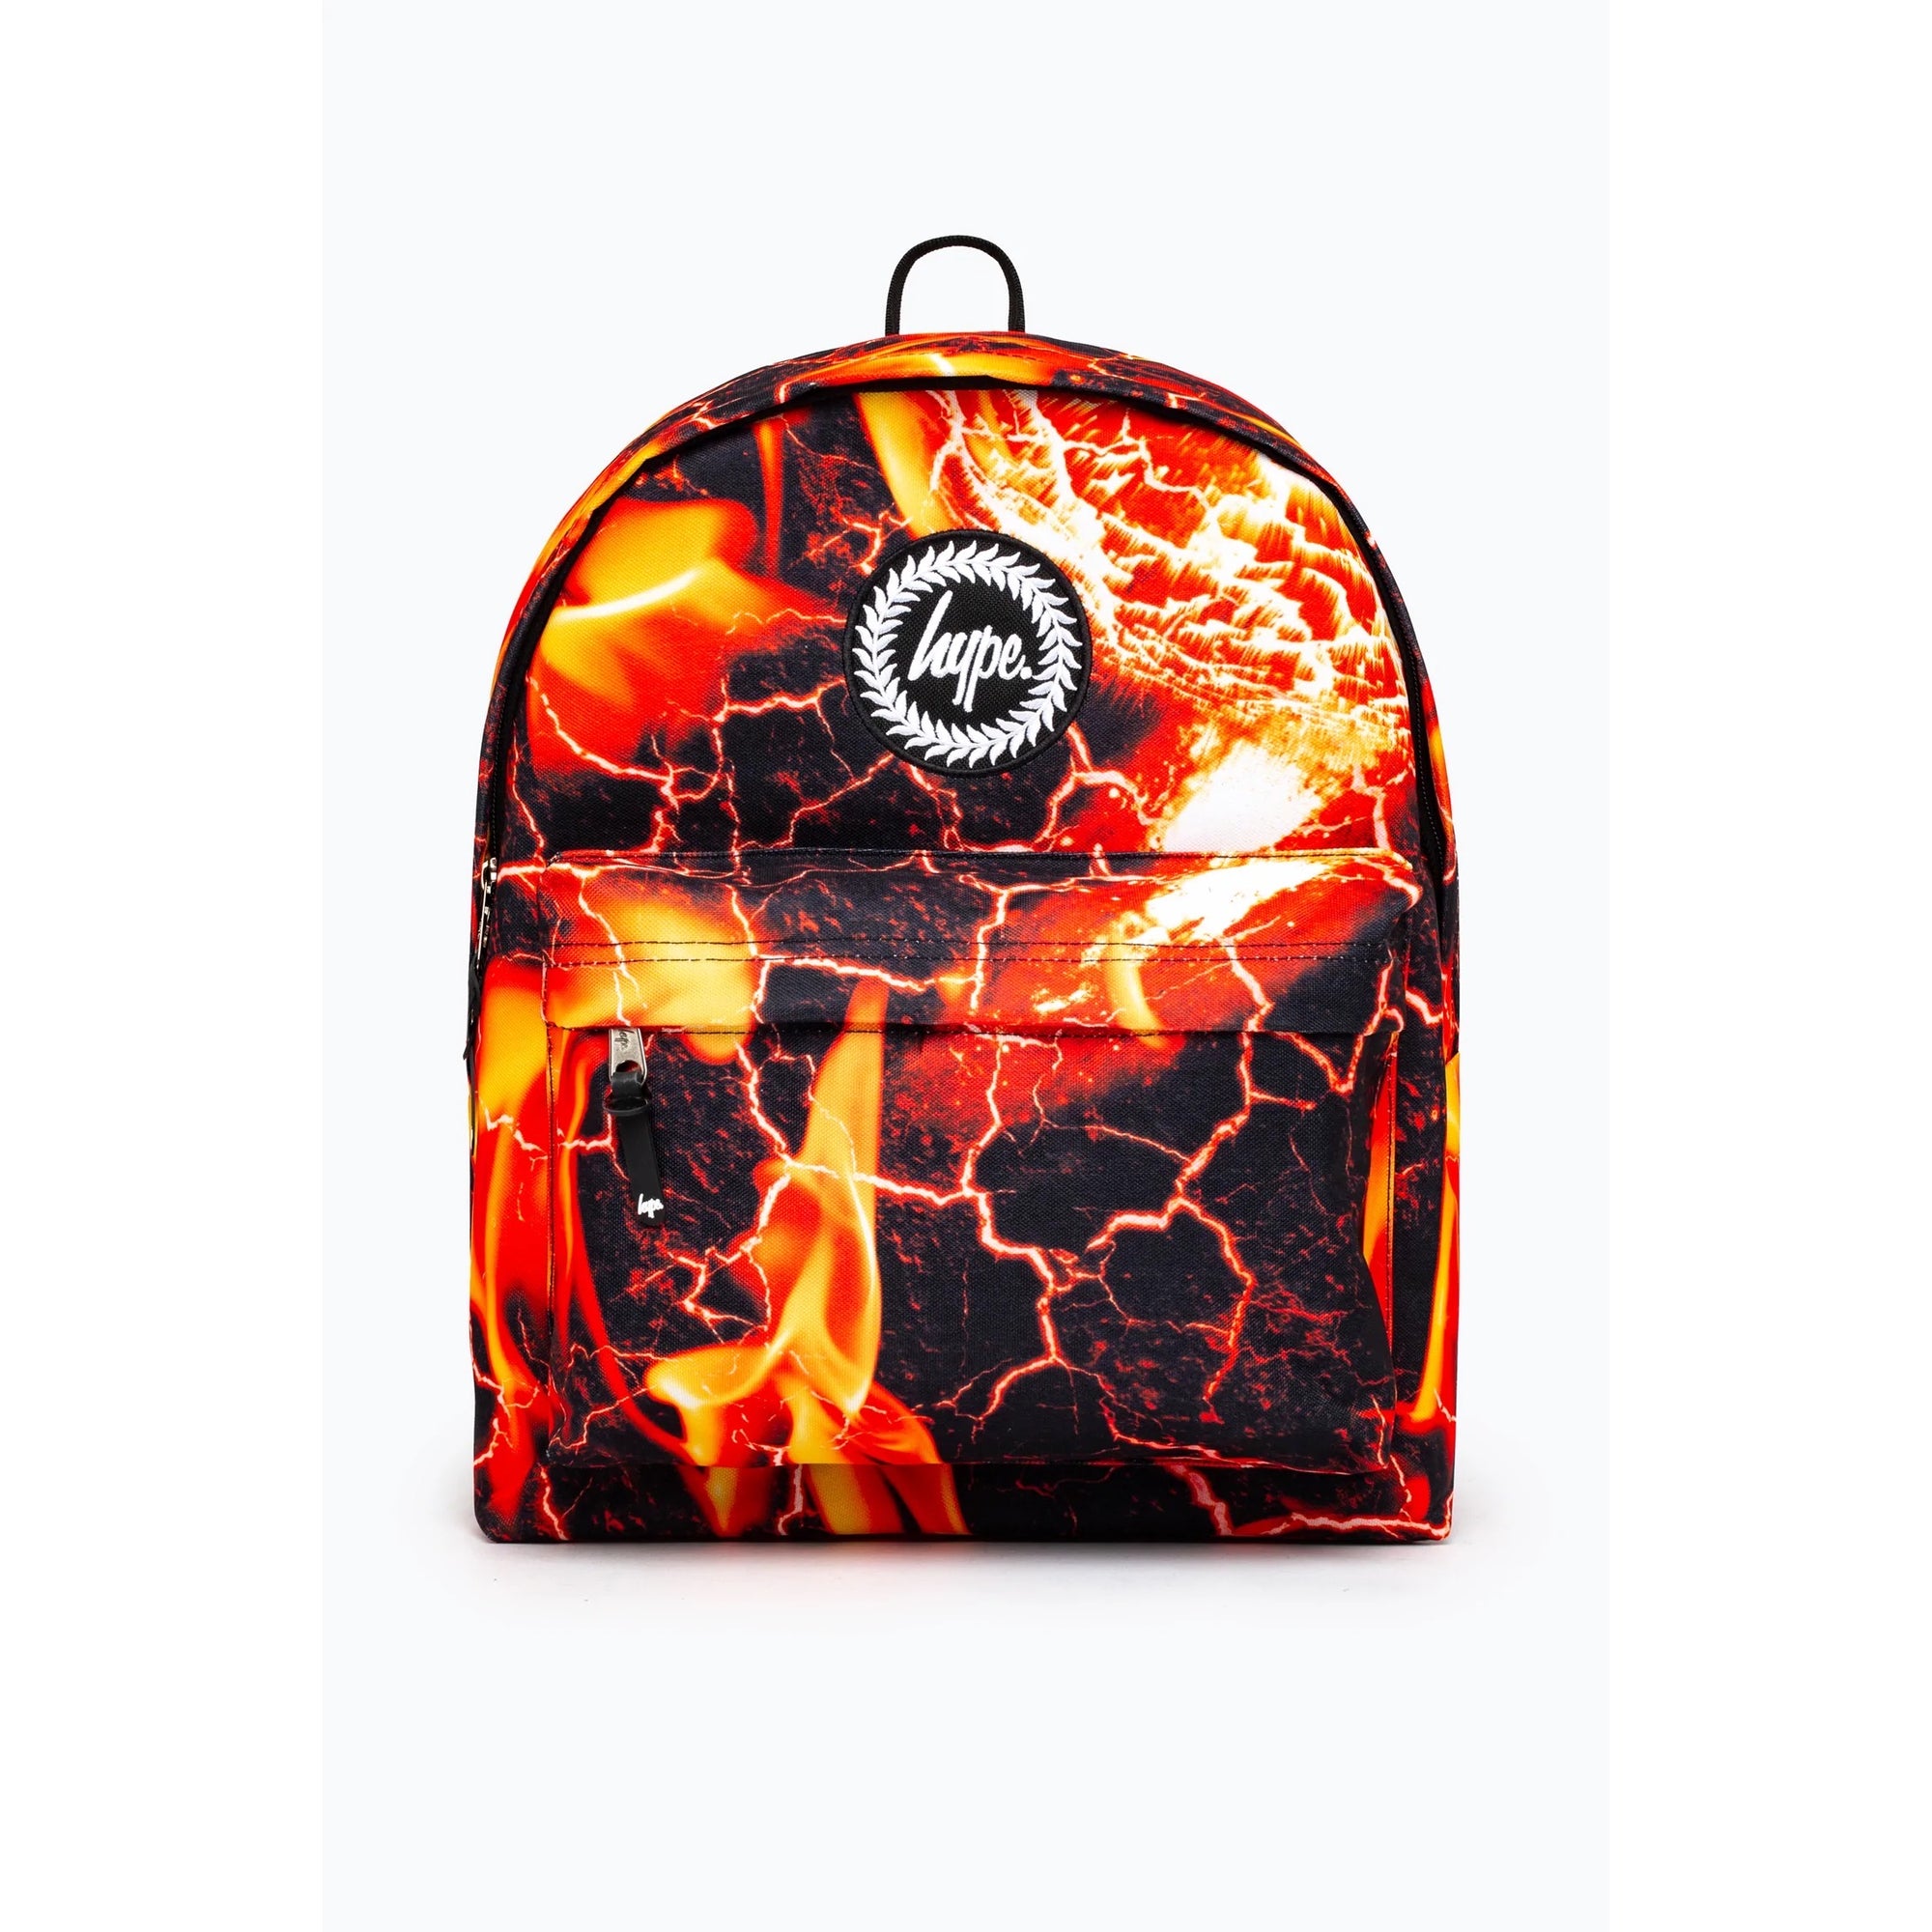 Hype Black Lava Fire Backpack Yvlr660 Accessories ONE SIZE / Multi